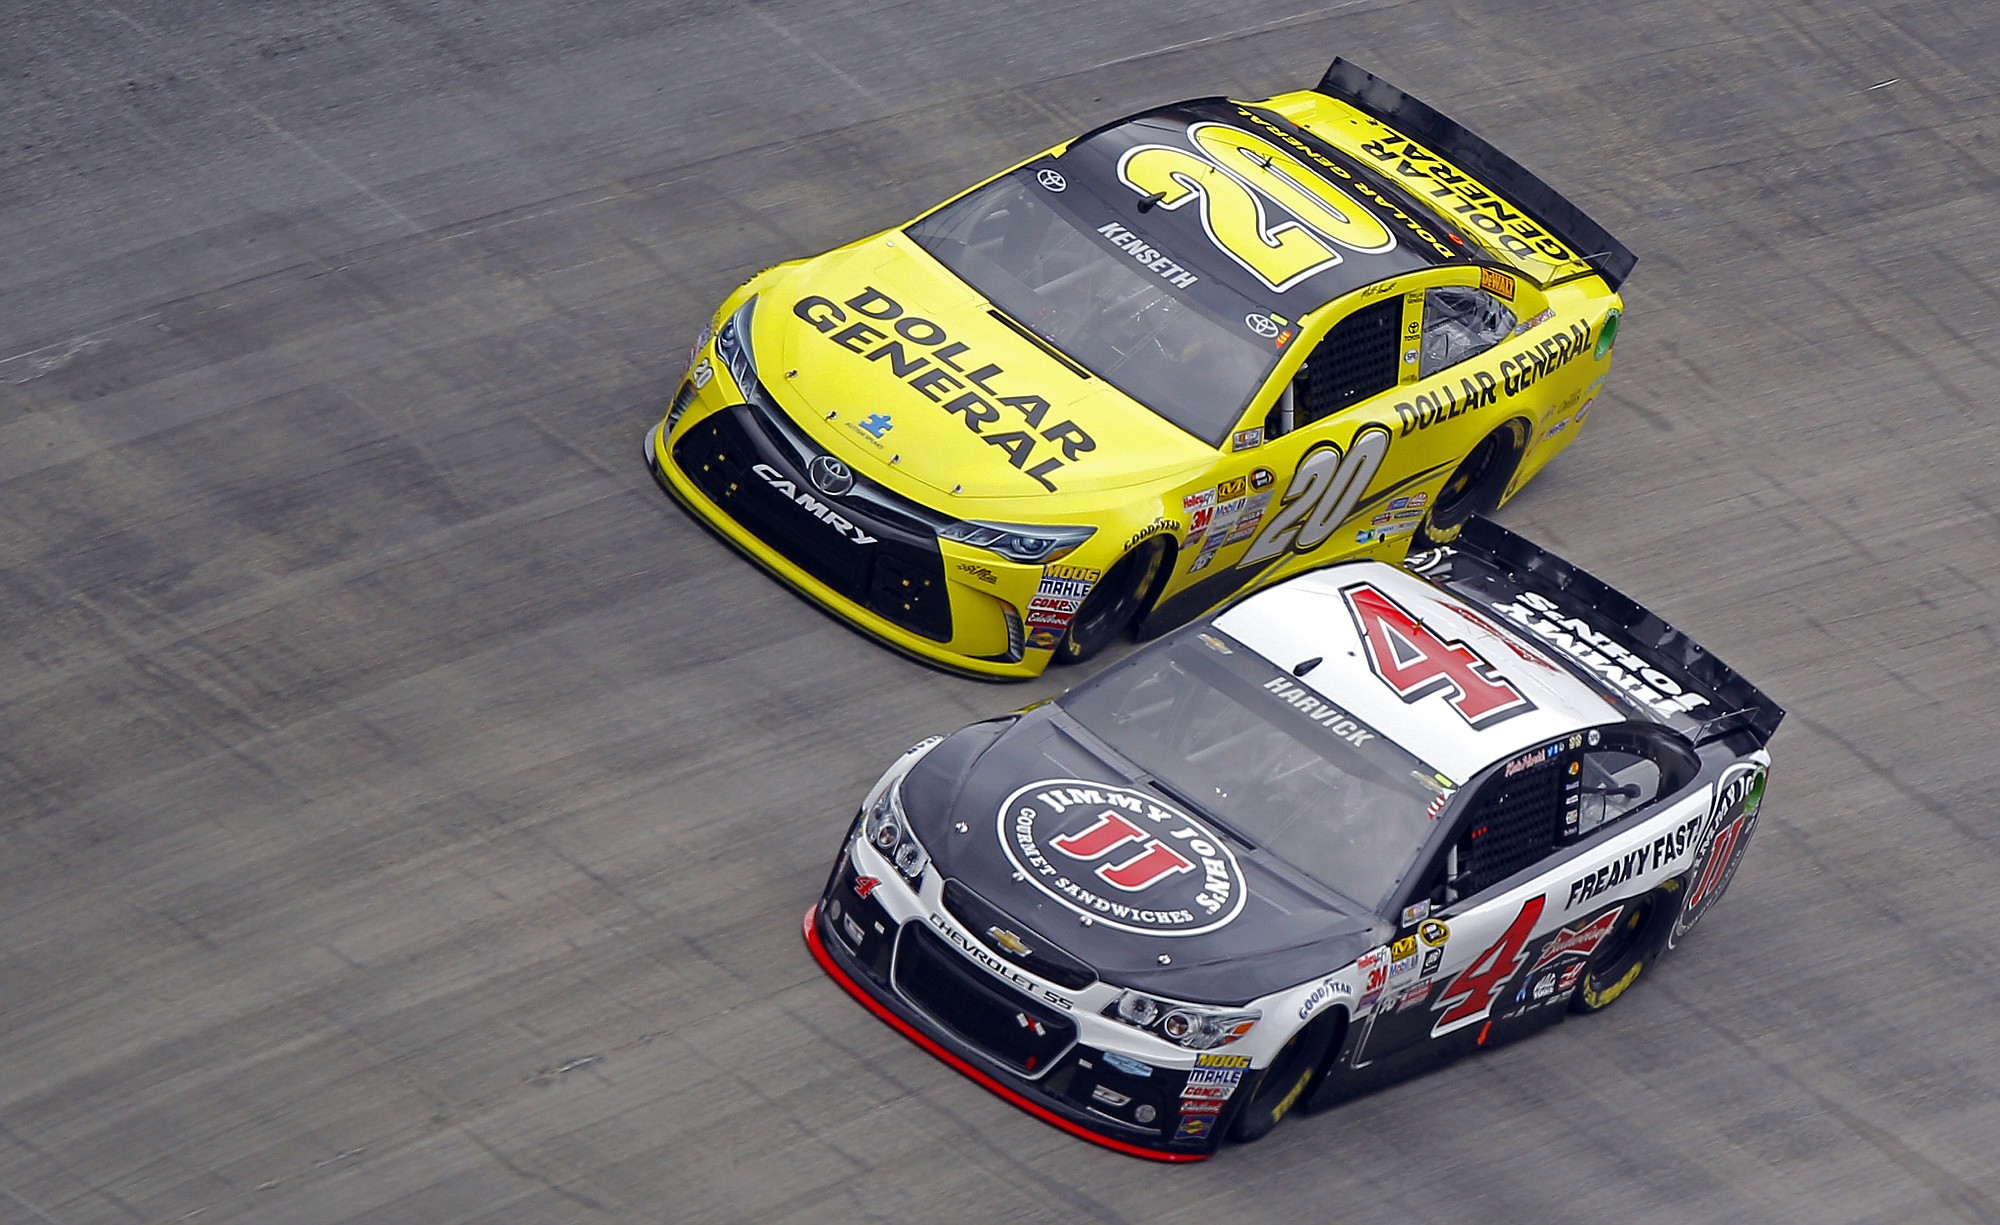 Driver Kevin Harvick (4) passes Matt Kenseth (20) to take the lead during the NASCAR Sprint Cup Series auto race at Bristol Motor Speedway on Sunday, April 19, 2015, in Bristol, Tenn.